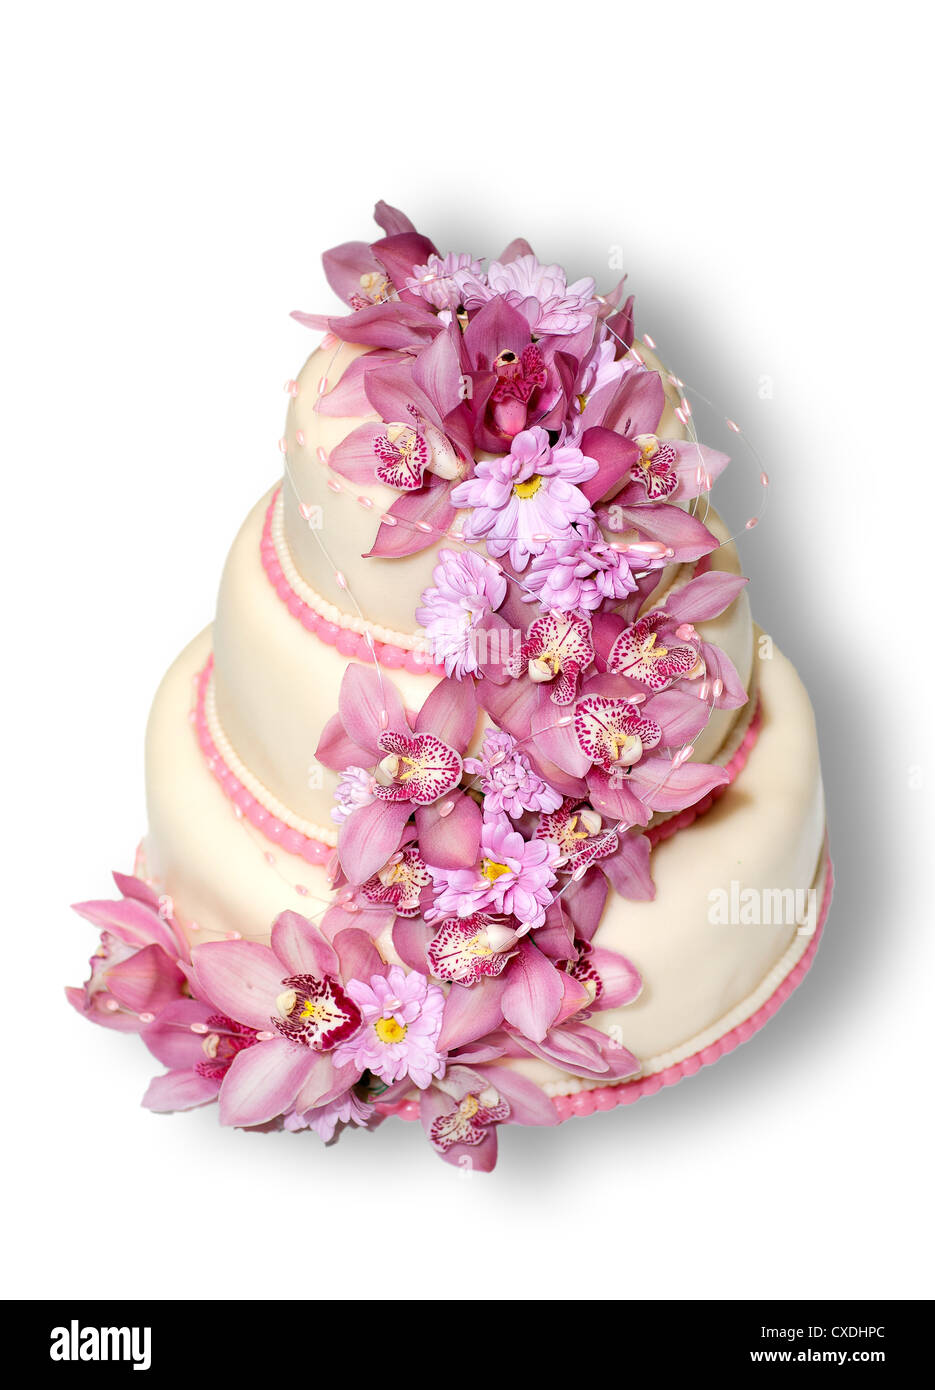 Traditional wedding cake with orchid flowers Stock Photo